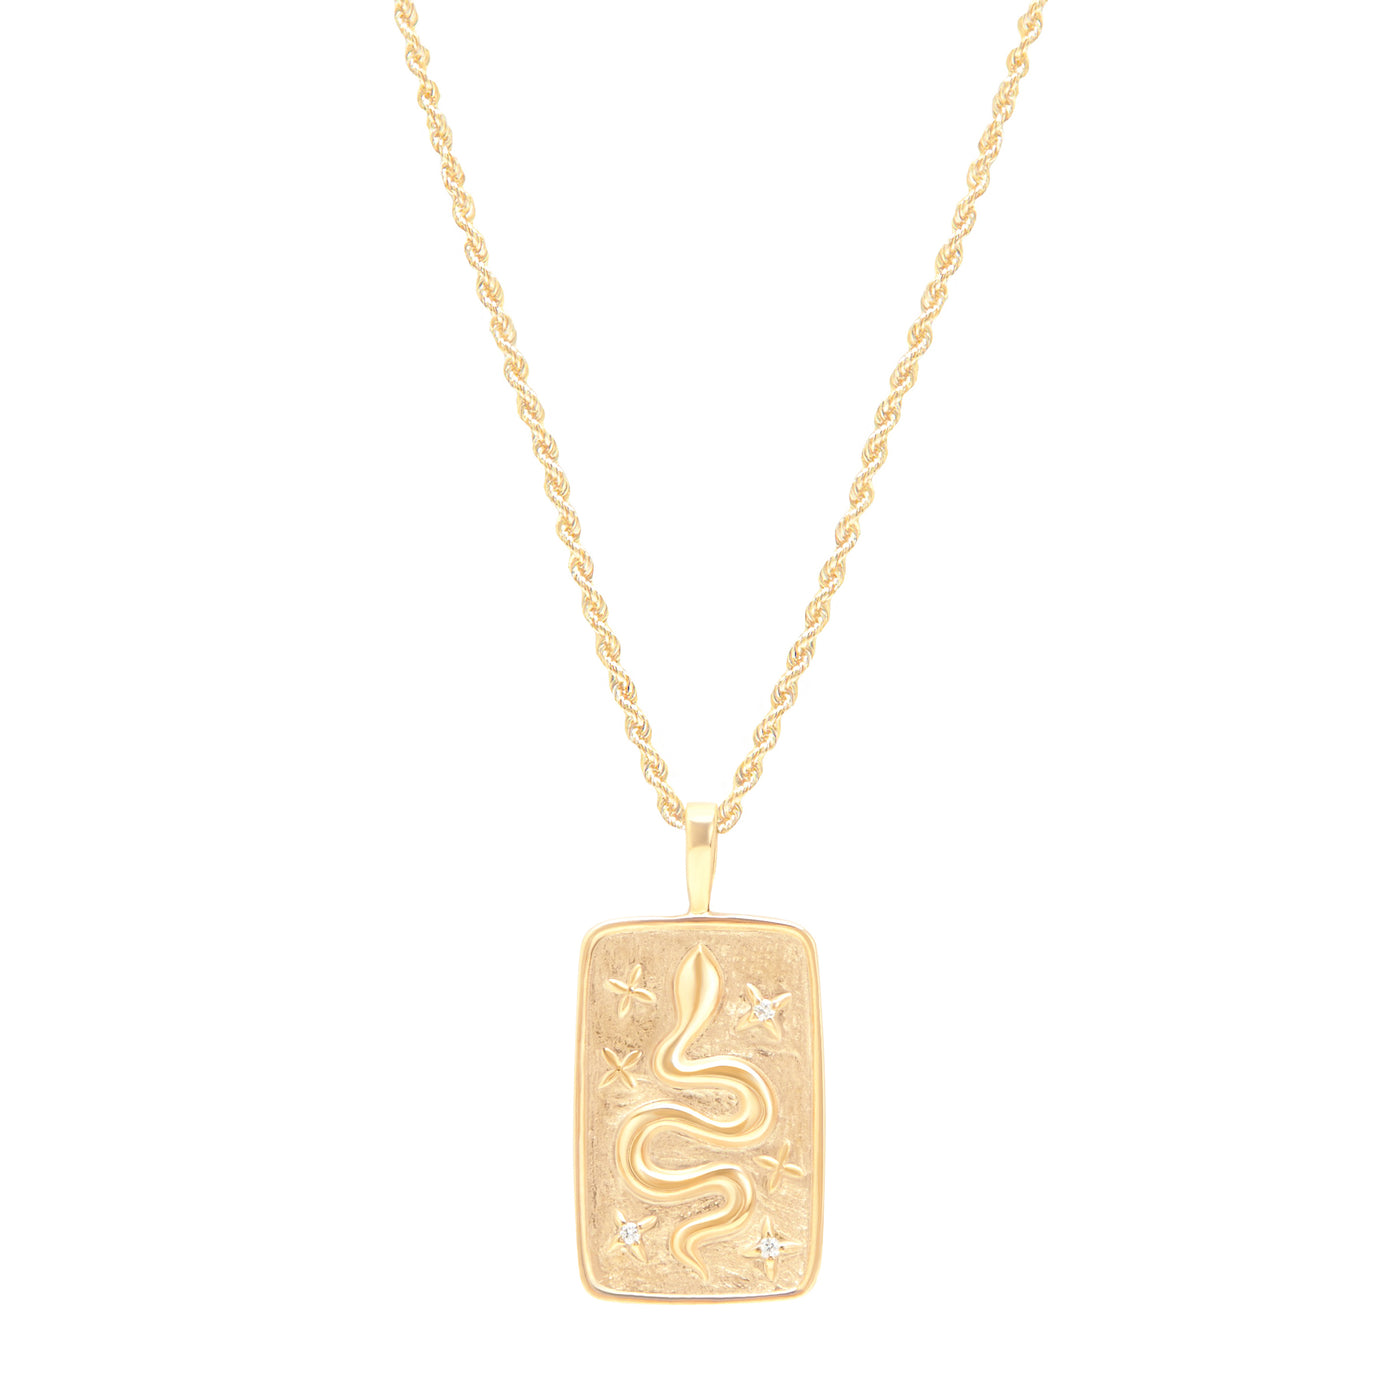 Snake pendant yellow gold on rope chain on white background